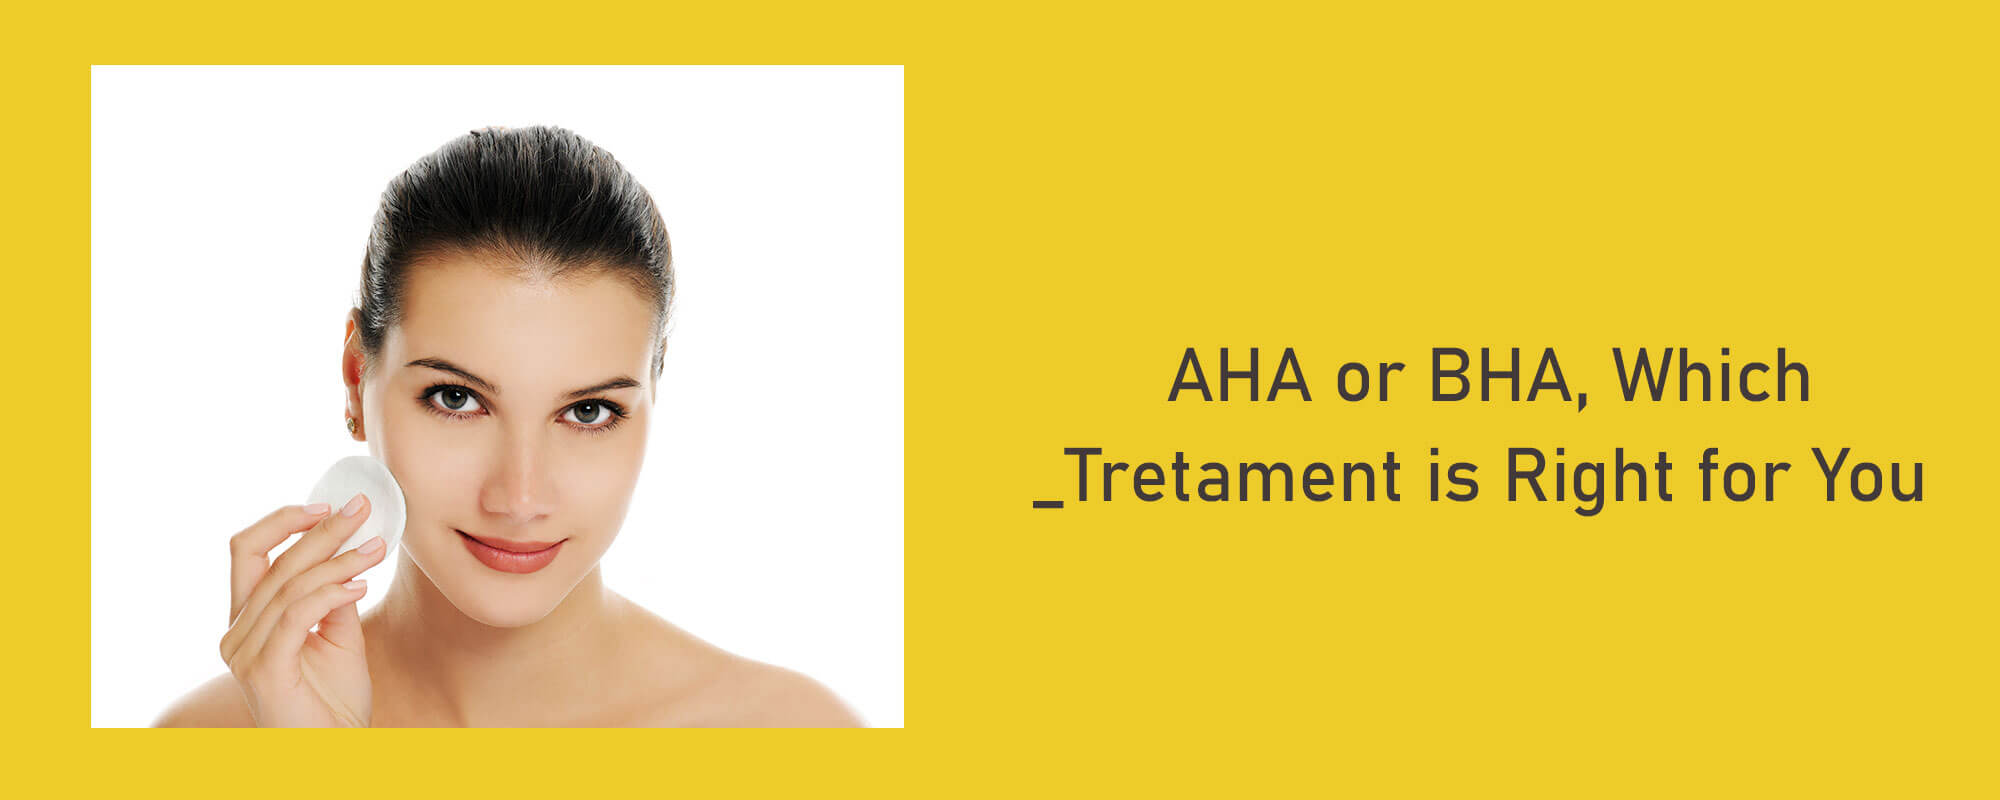 AHA or BHA, Which Treatment is Right for You? - 1